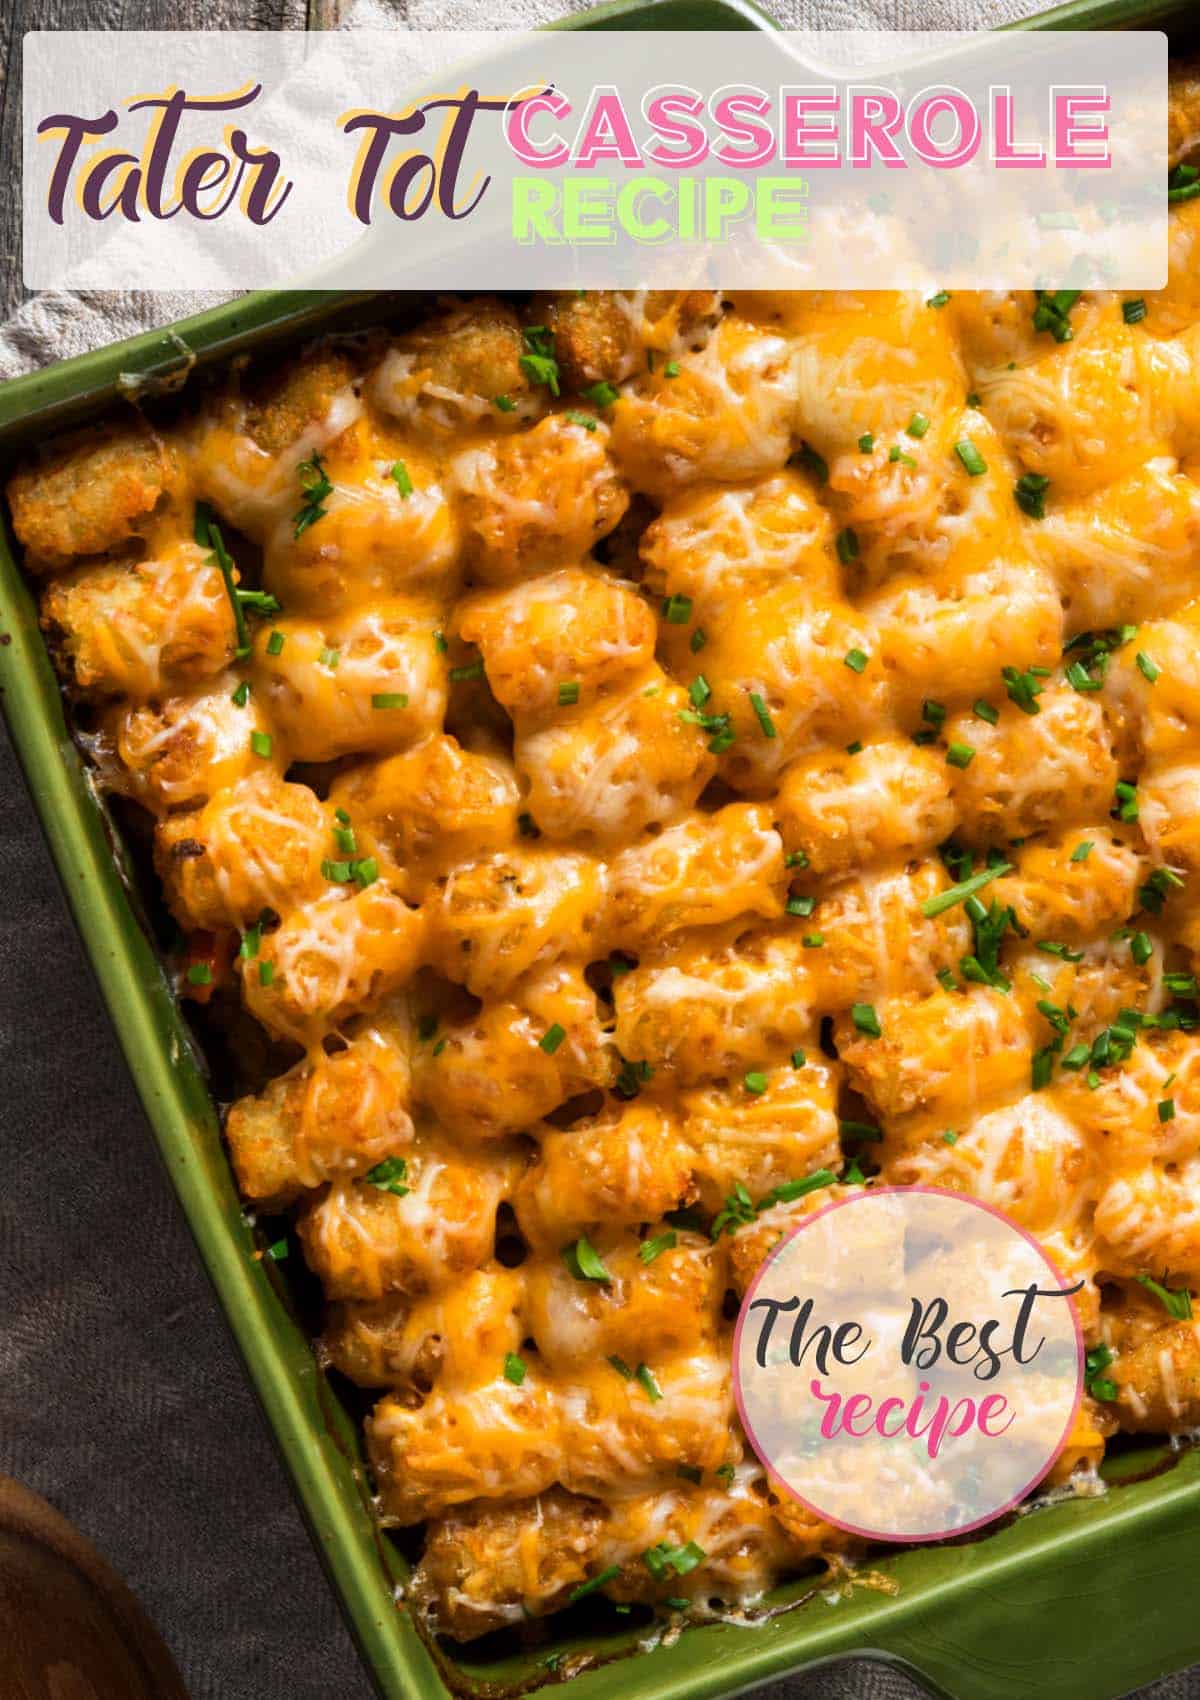 I love how easy and convenient this recipe is! The Tater Tot Casserole can be made in a single pot, making it an easy one-dish meal perfect for busy weeknights. It's also budget-friendly and can be customized with different meats, vegetables, and cheeses to suit your preferences.